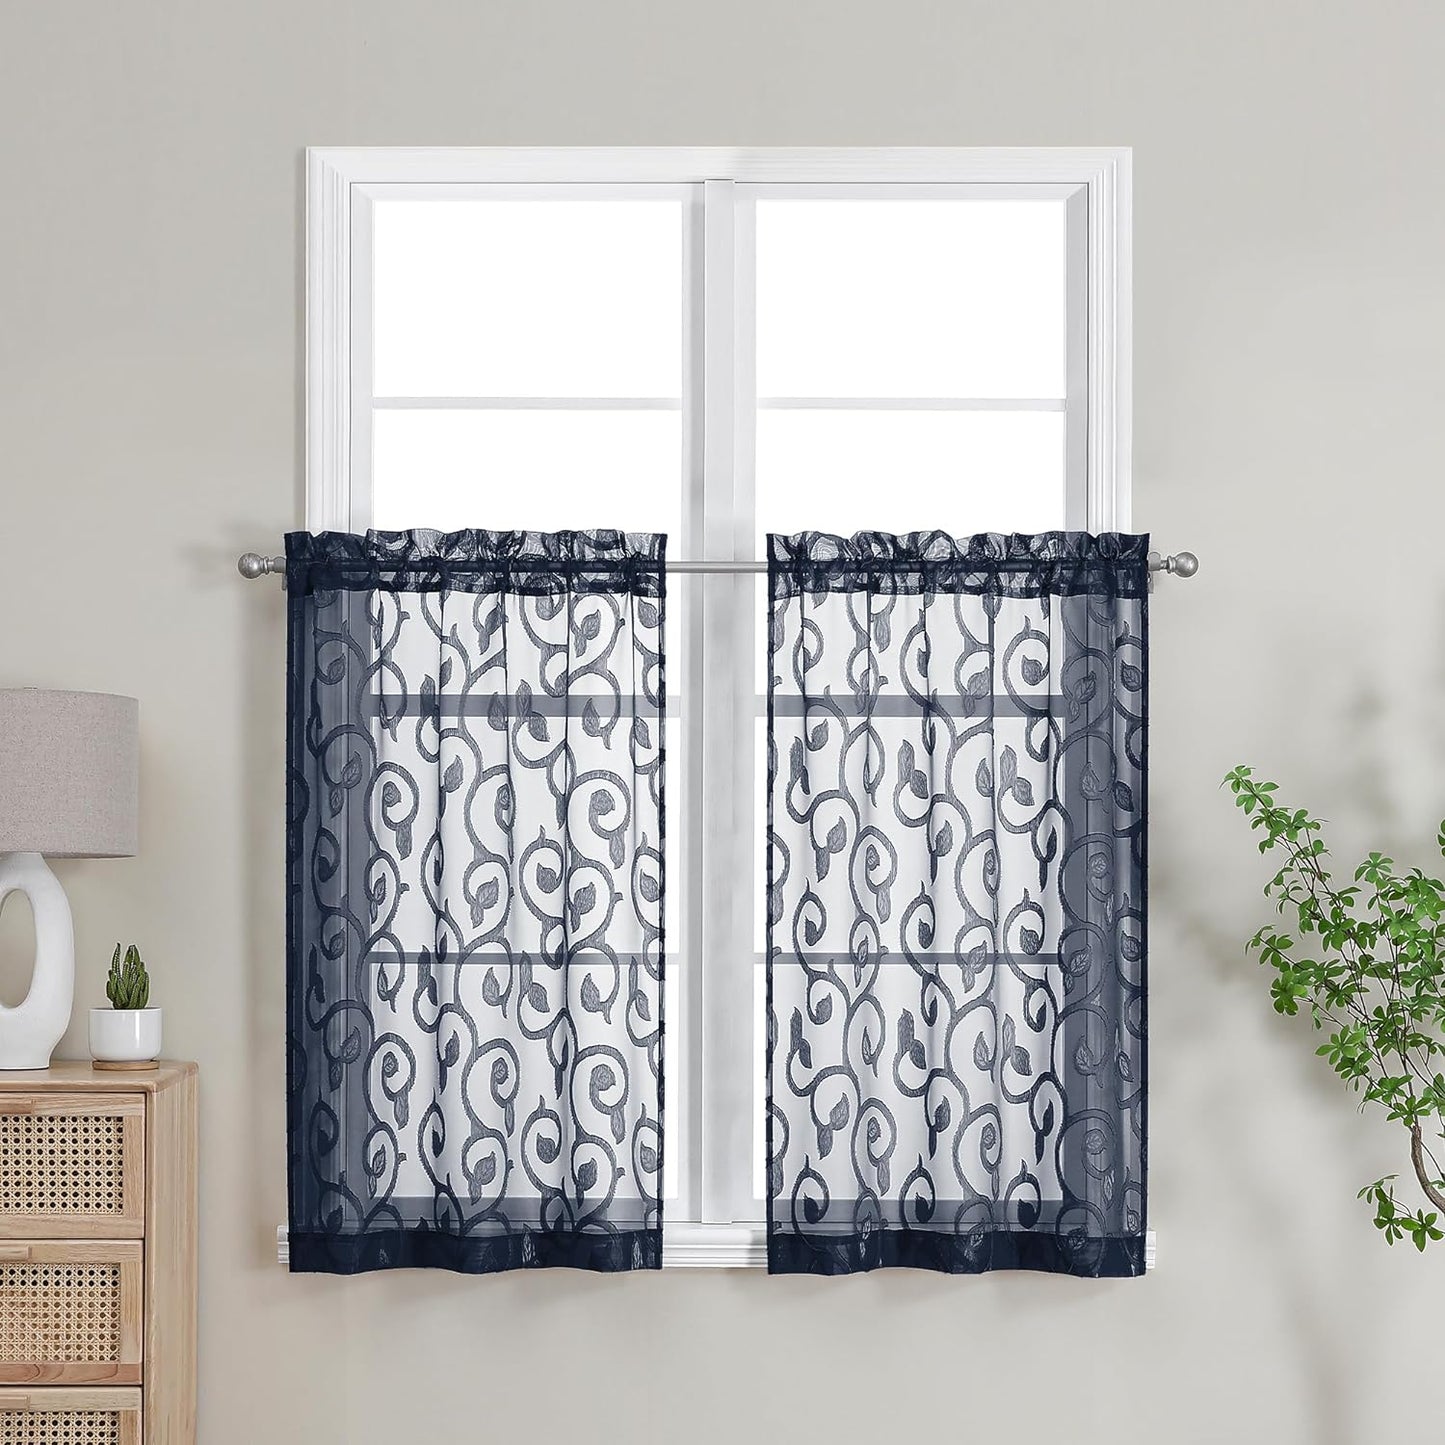 OWENIE Furman Sheer White Curtains 84 Inches Long for Bedroom Living Room 2 Panels Set, White Curtains Jacquard Clip Light Filtering Semi Sheer Curtain Transparent Rod Pocket Window Drapes, 2 Pcs  OWENIE Navy Blue 26W X 36L 